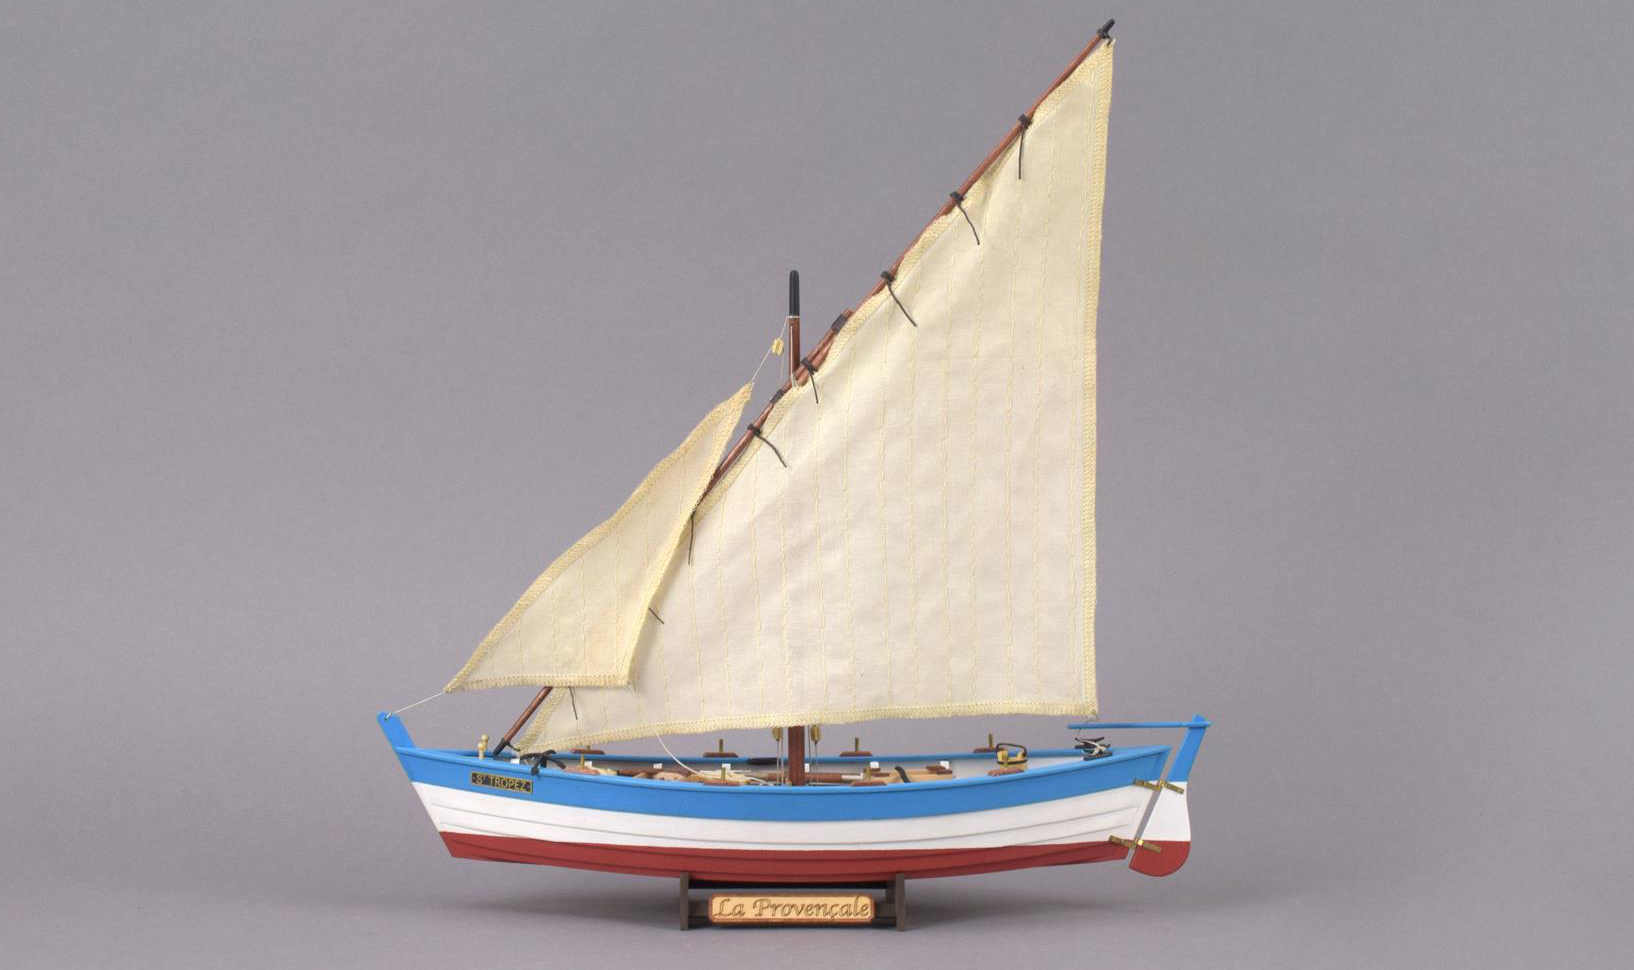 La Provençale by HakeZou - FINISHED - Artesania Latina - 1/20 scale - - Kit  build logs for subjects built from 1851 - 1900 - Model Ship World™